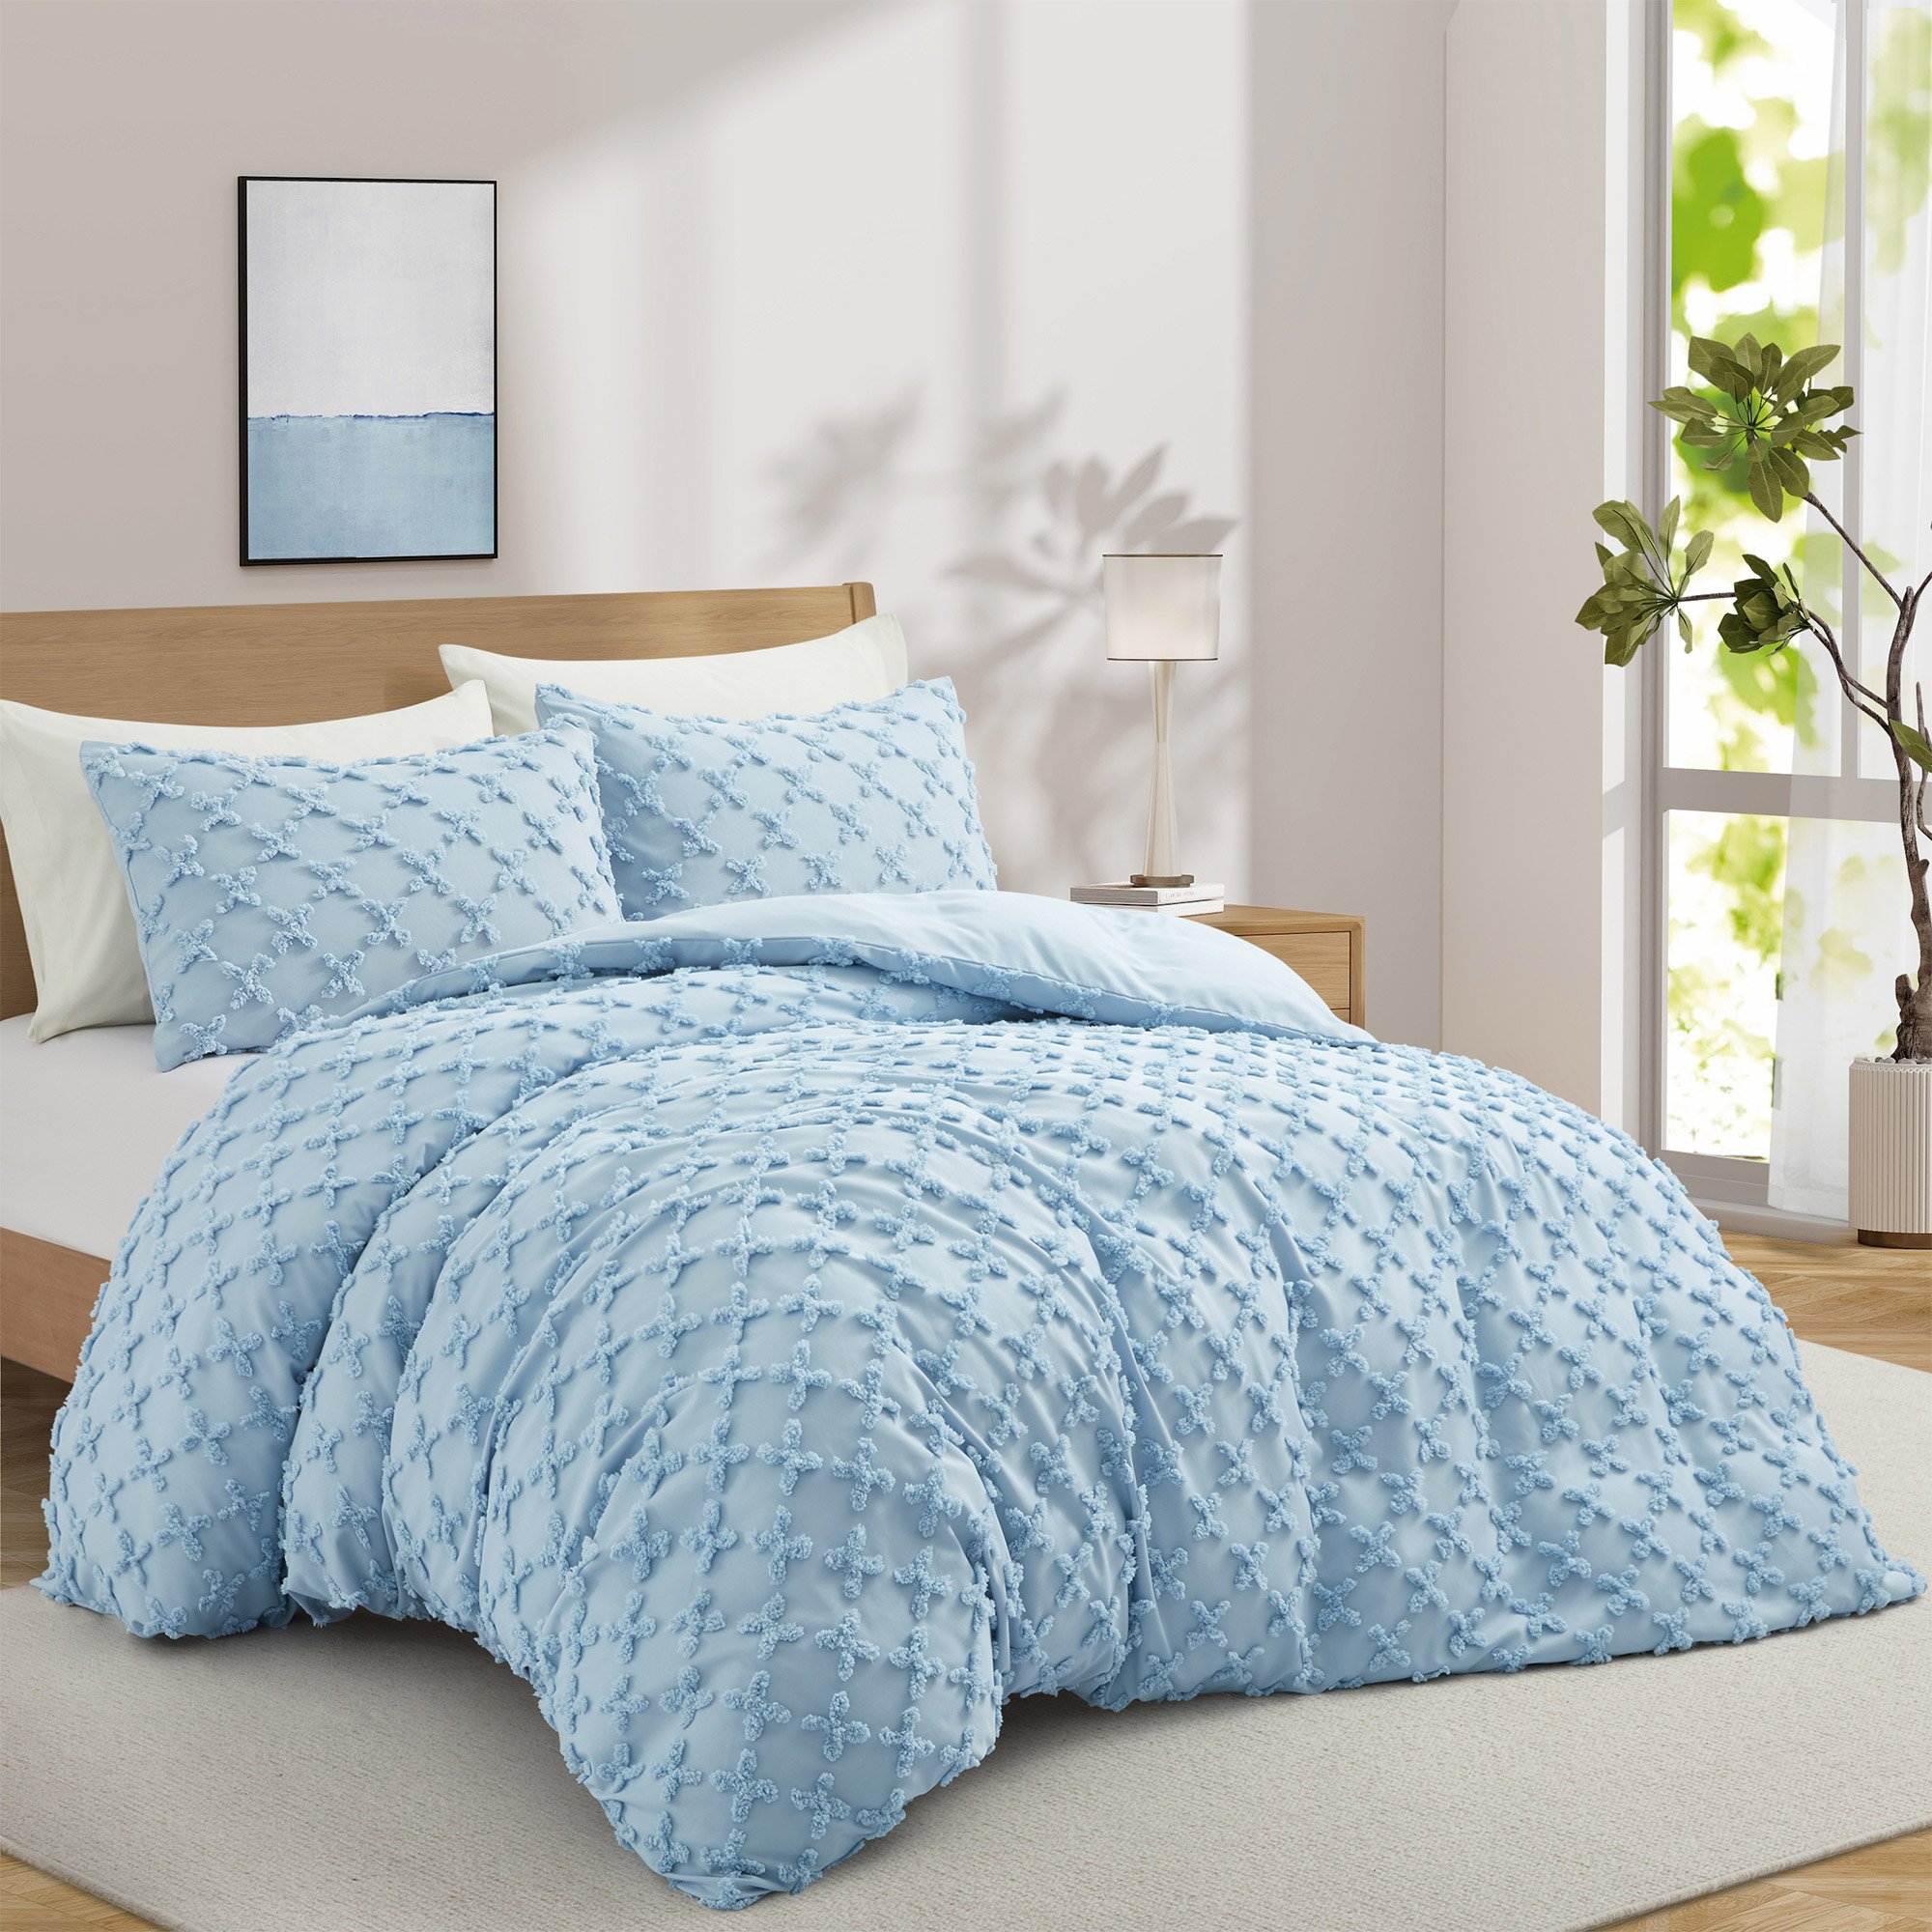 2 Or 3 Piece Soft Microfiber Clipped Duvet Cover Set With Shams - Baby Blue, Full/Queen-90*90